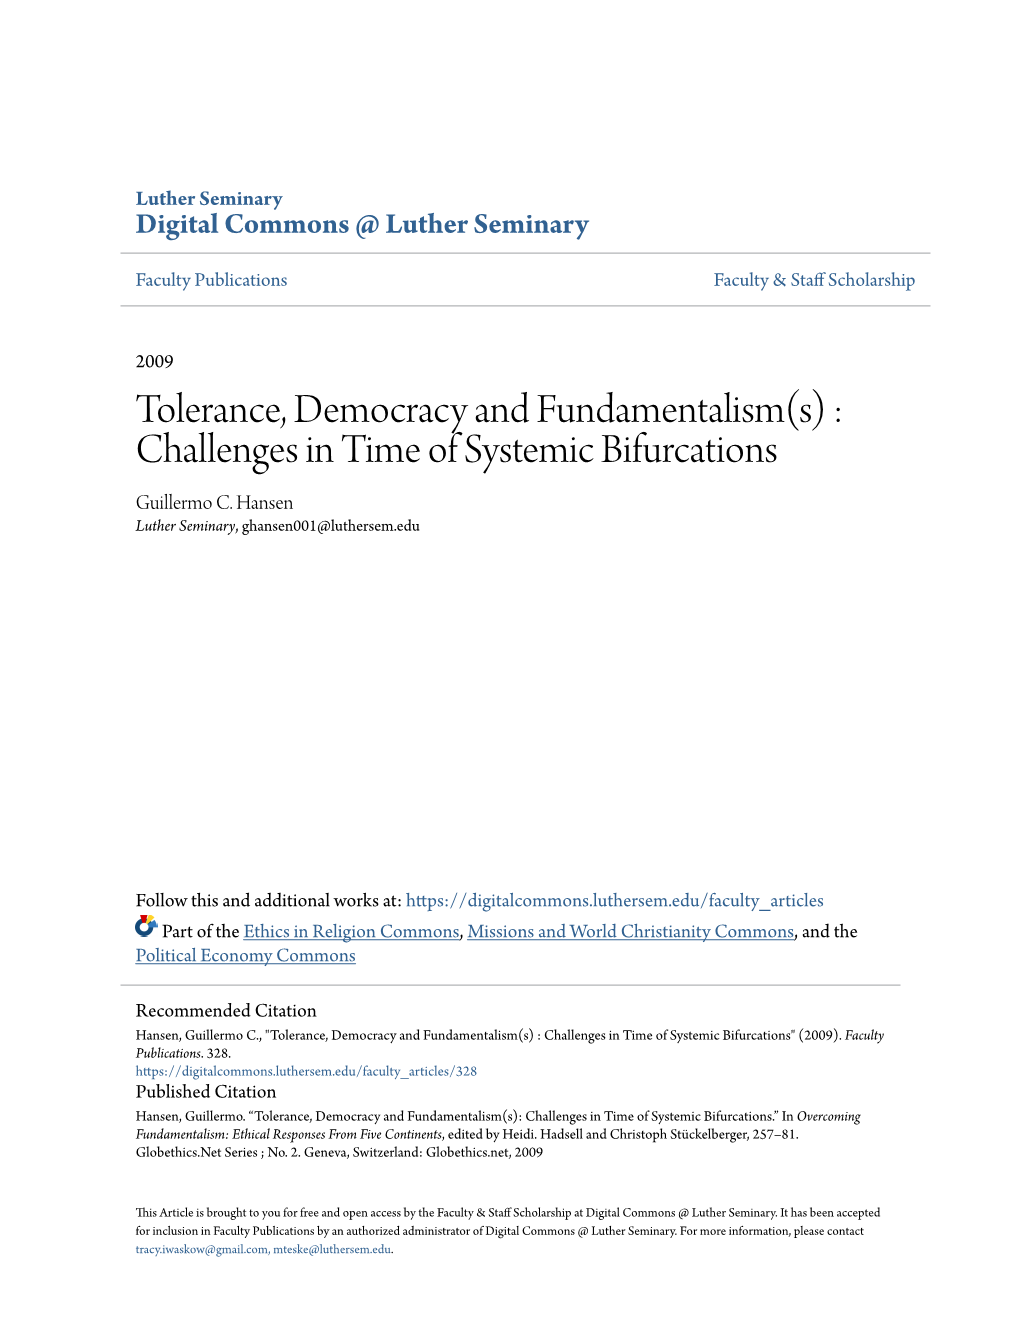 Tolerance, Democracy and Fundamentalism(S) : Challenges in Time of Systemic Bifurcations Guillermo C